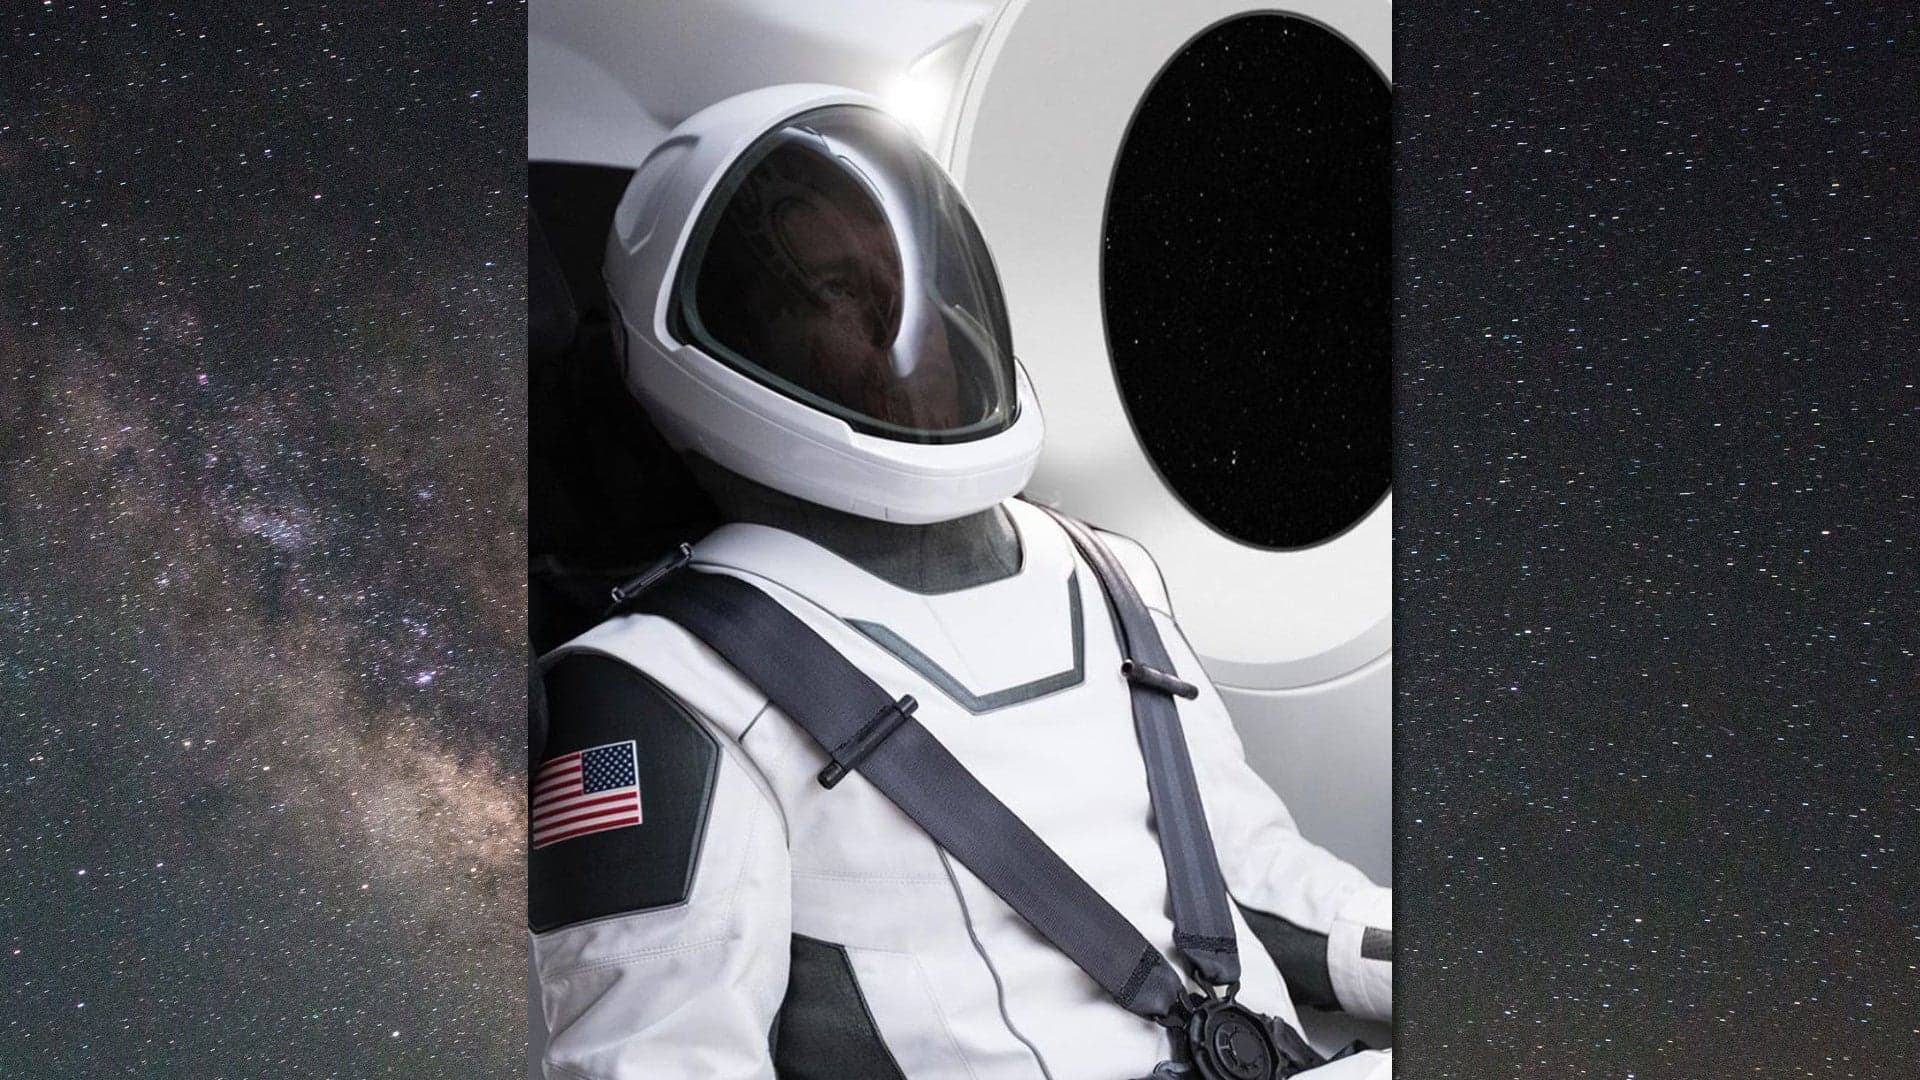 Elon Musk Unveils First Look at the Official SpaceX Spacesuit